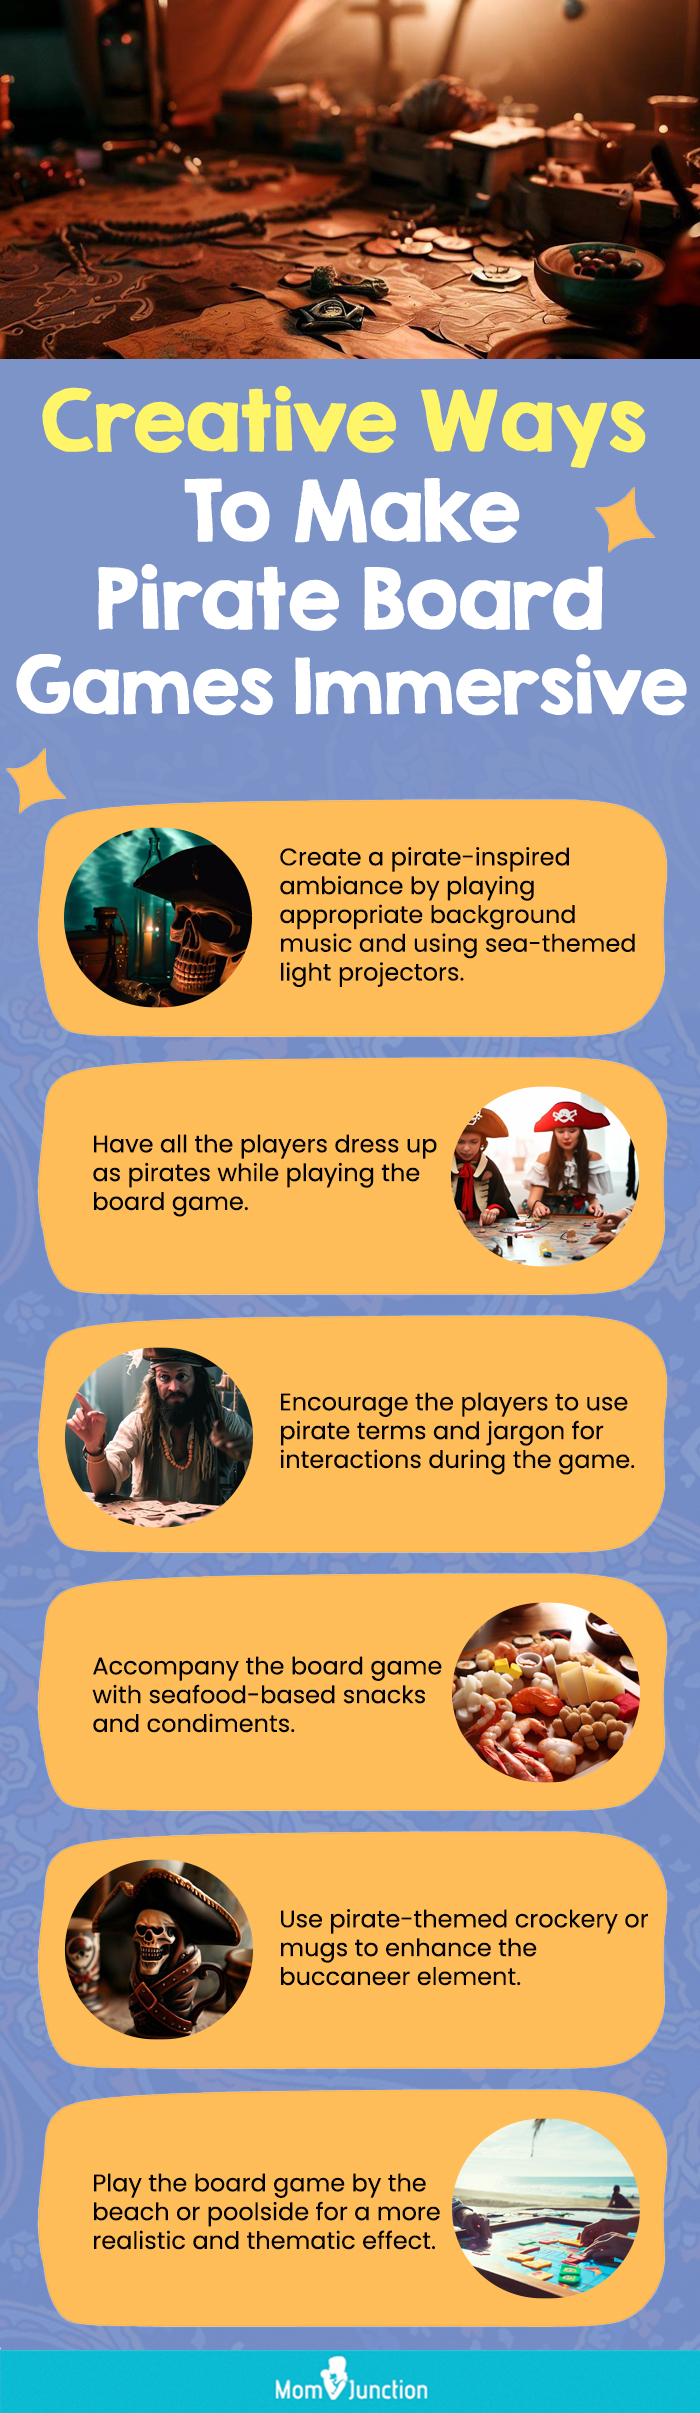 Creative Ways To Make Pirate Board Games Immersive (infographic)